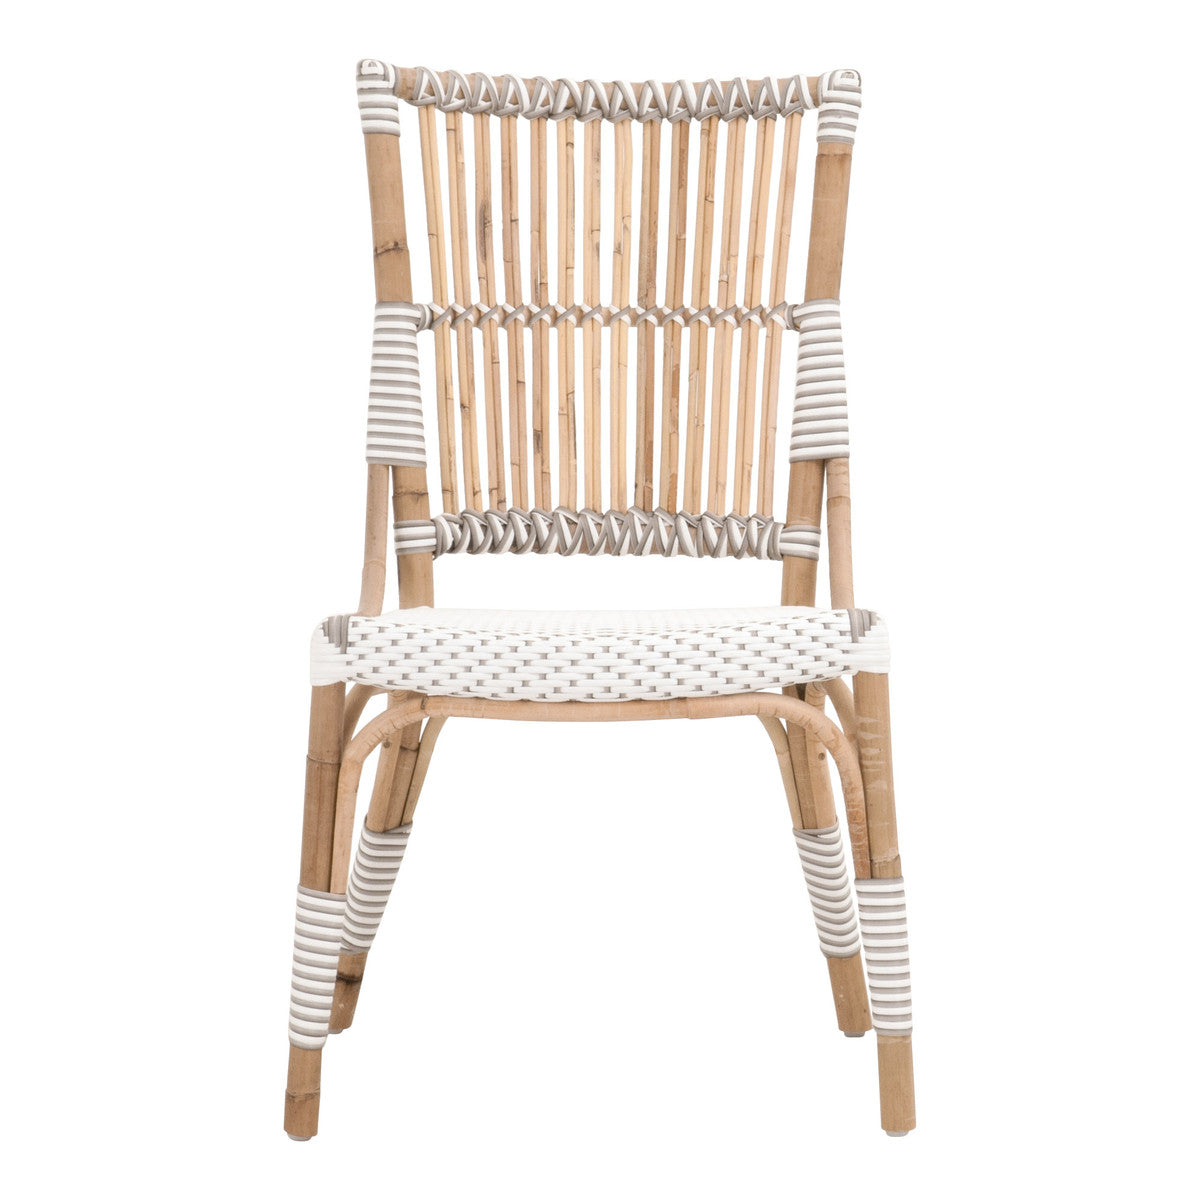 Dorset Dining Chair, set of 2